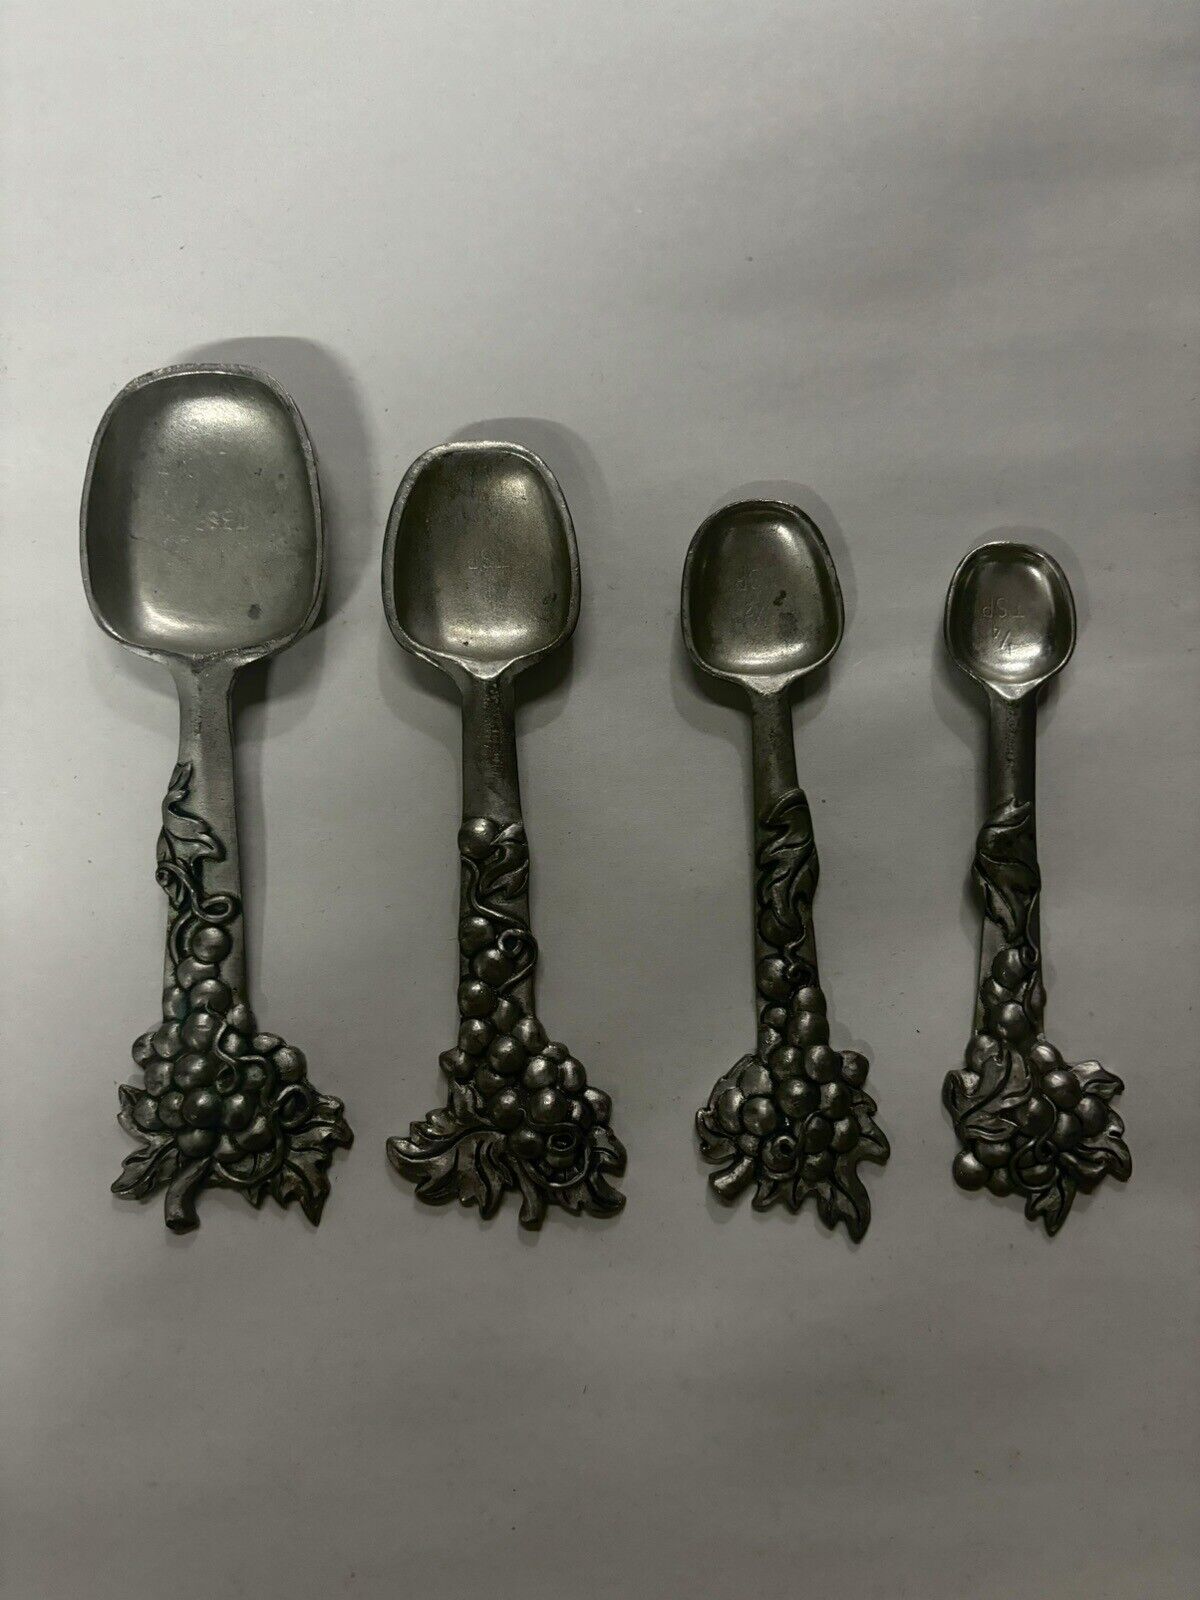 Seagull Pewter Measuring Spoons grape Pattern 1996